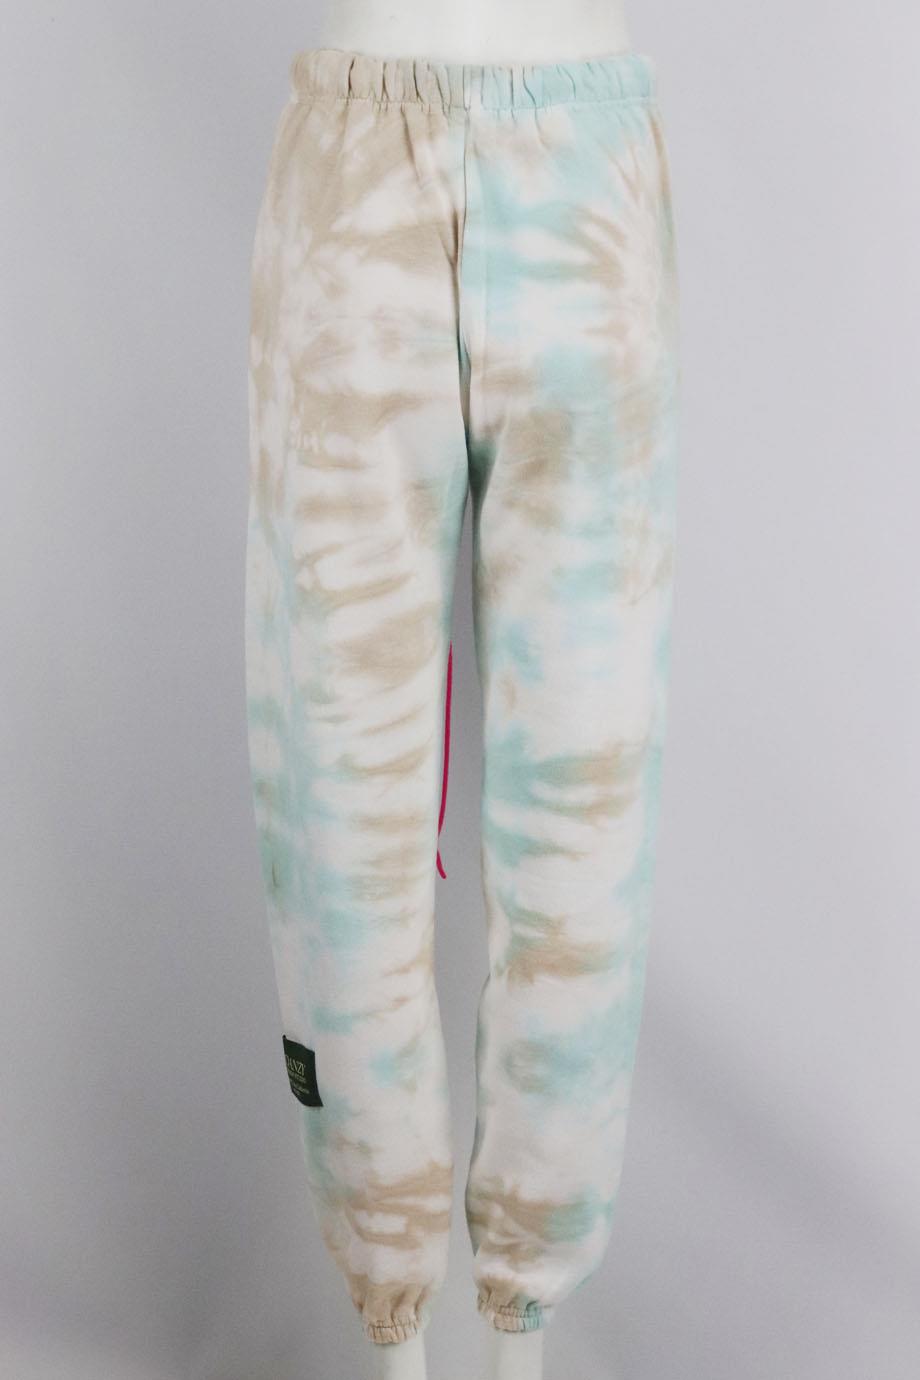 DANZY TIE DYED COTTON BLEND JERSEY TRACK PANTS SMALL